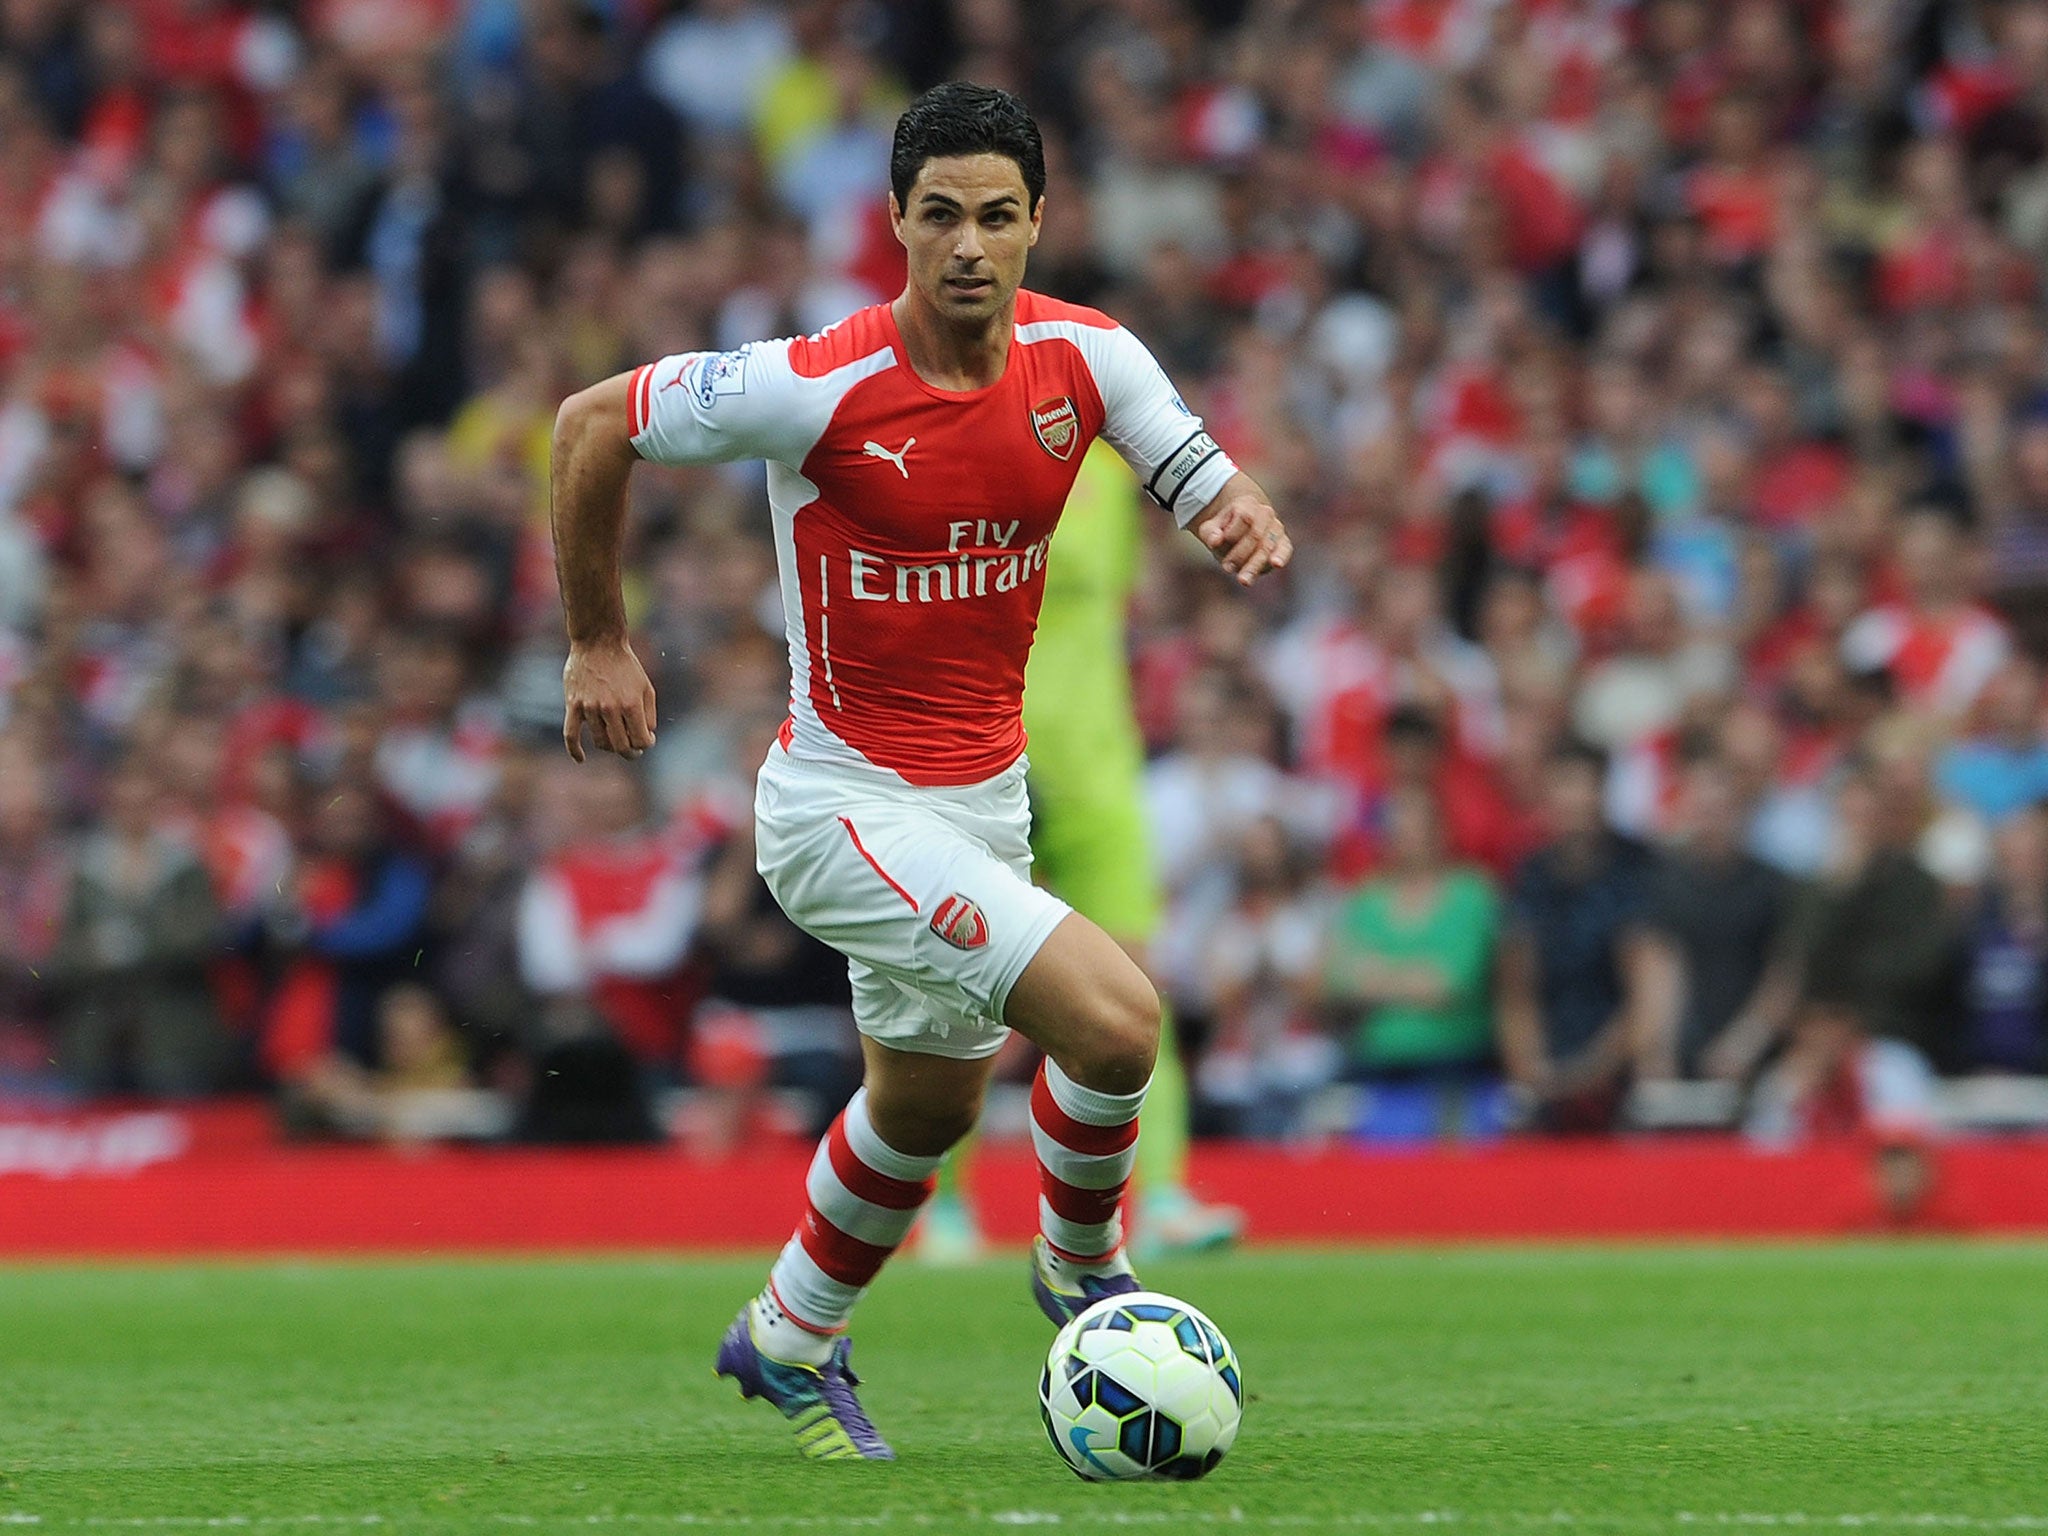 Mikel Arteta ready to accept Arsenal's one-year contract extension as